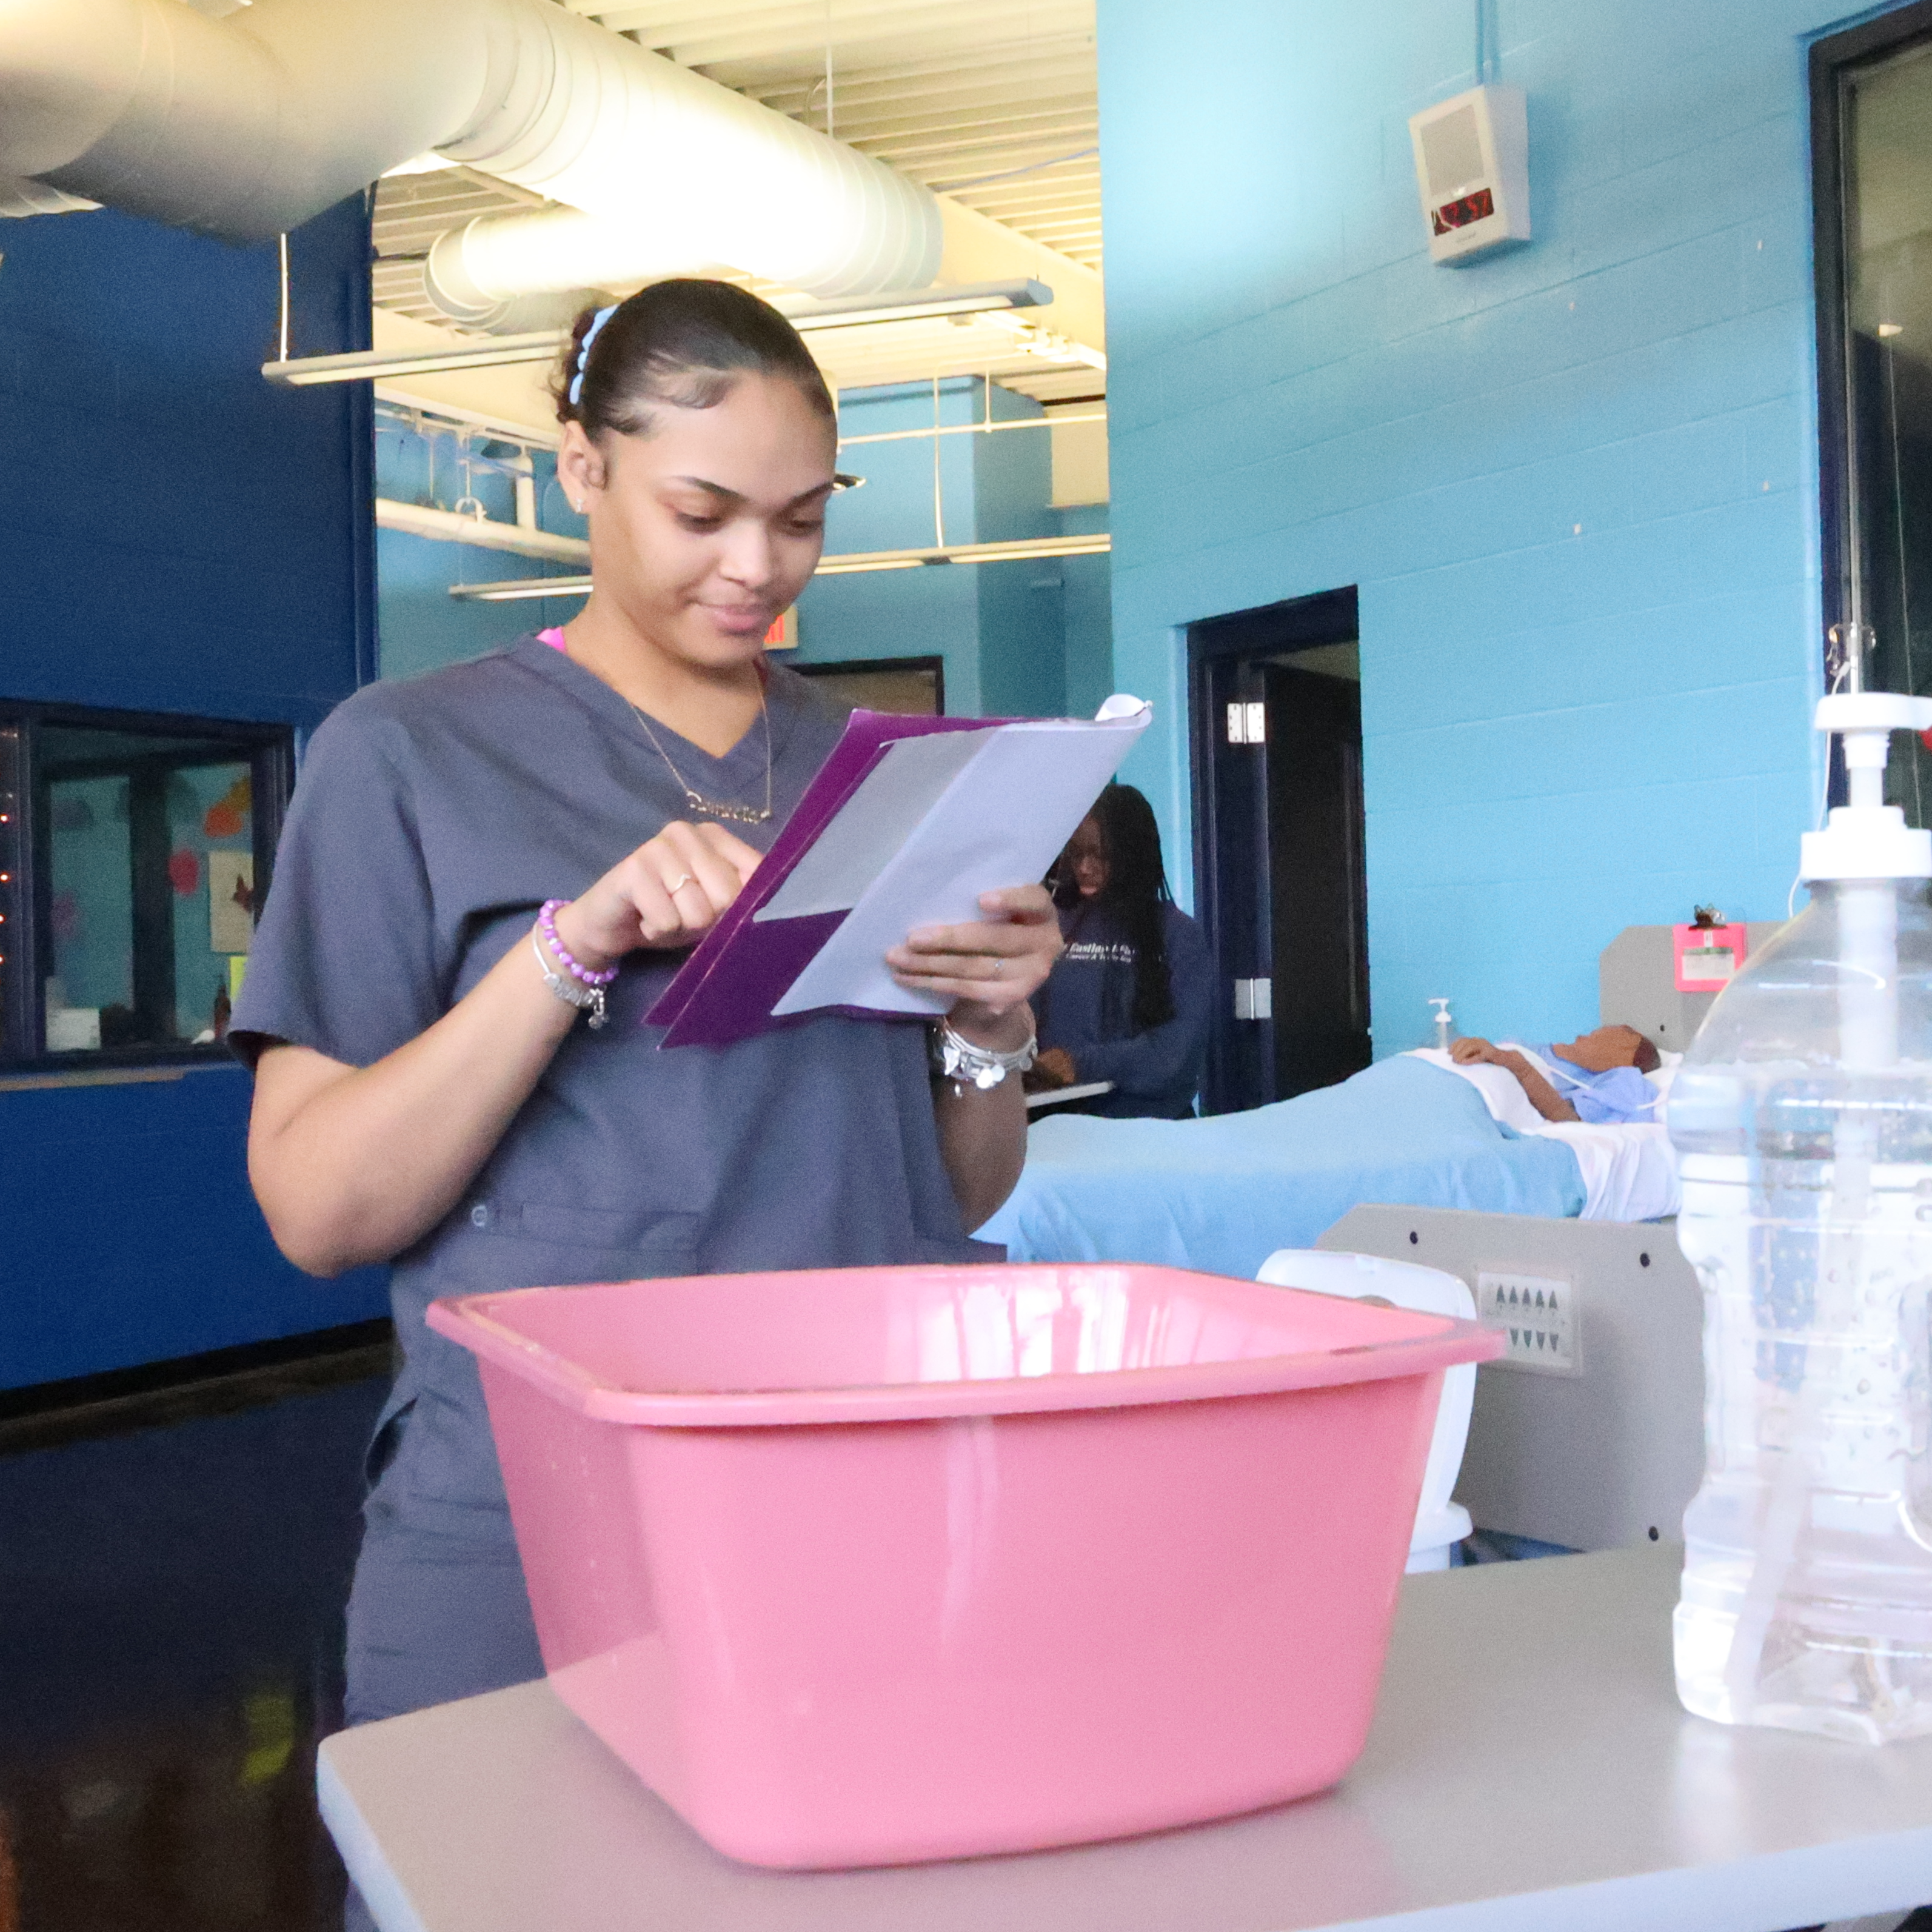 A Black, female student stands behind her cart of supplies that contains a bed pan and hand sanitizer. She is examining a checklist before giving patient care.